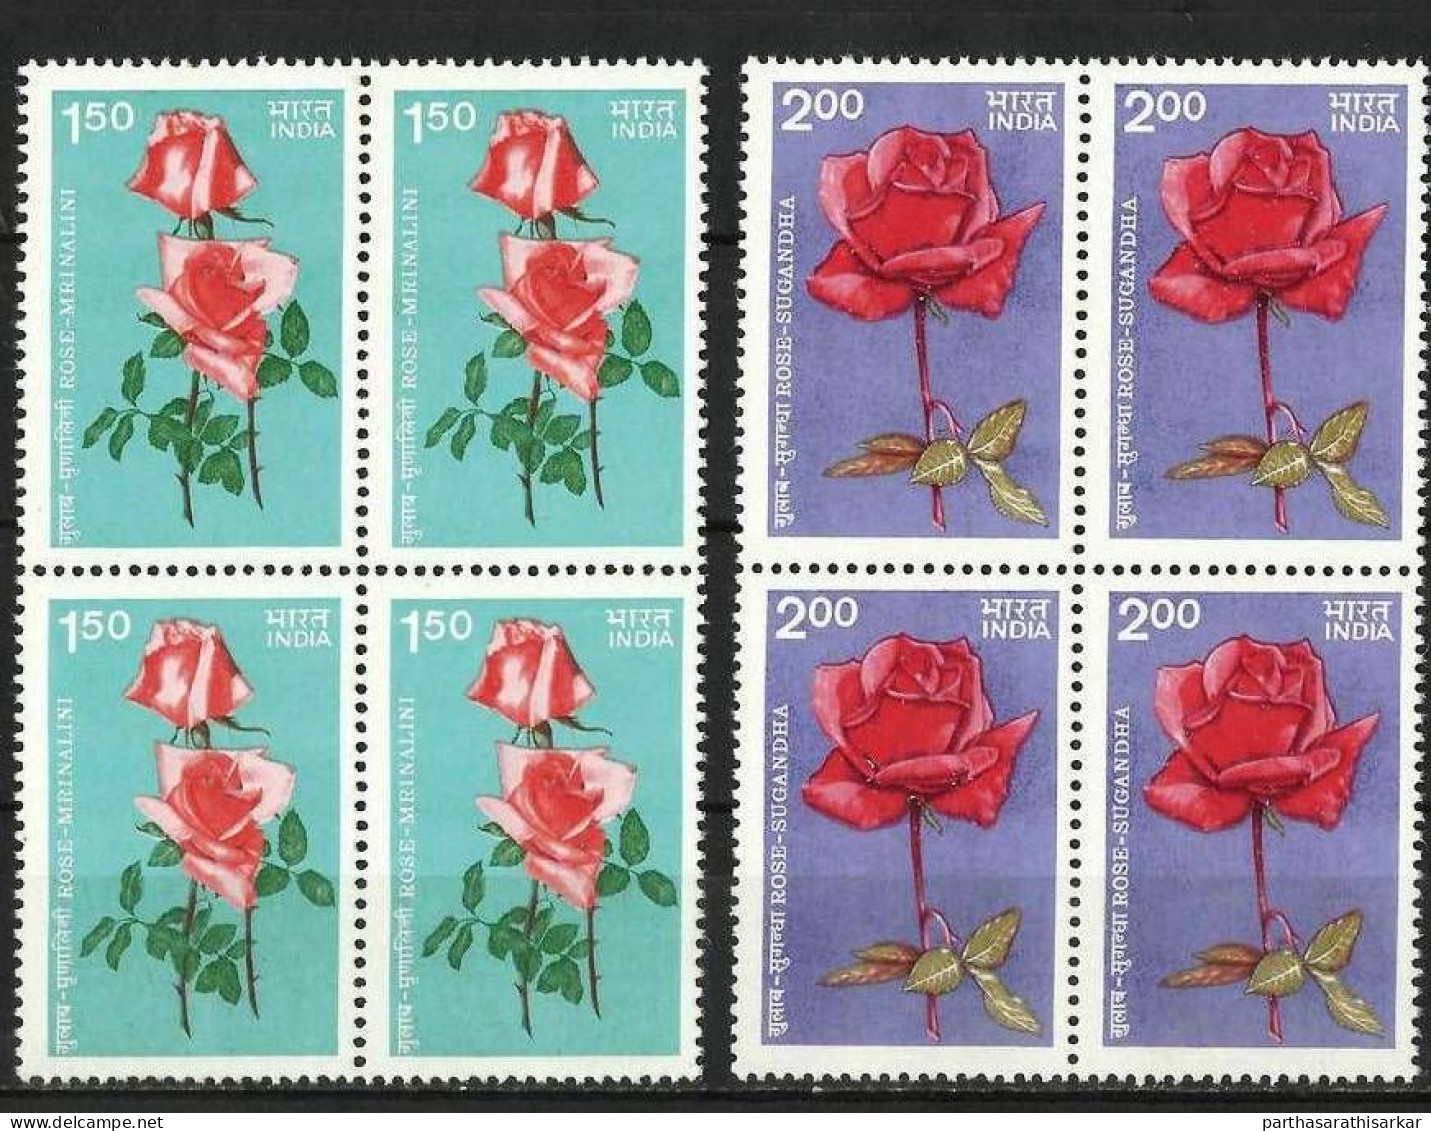 INDIA 1984 ROSES COMPLETE SET BLOCK OF 4 MNH - Unused Stamps